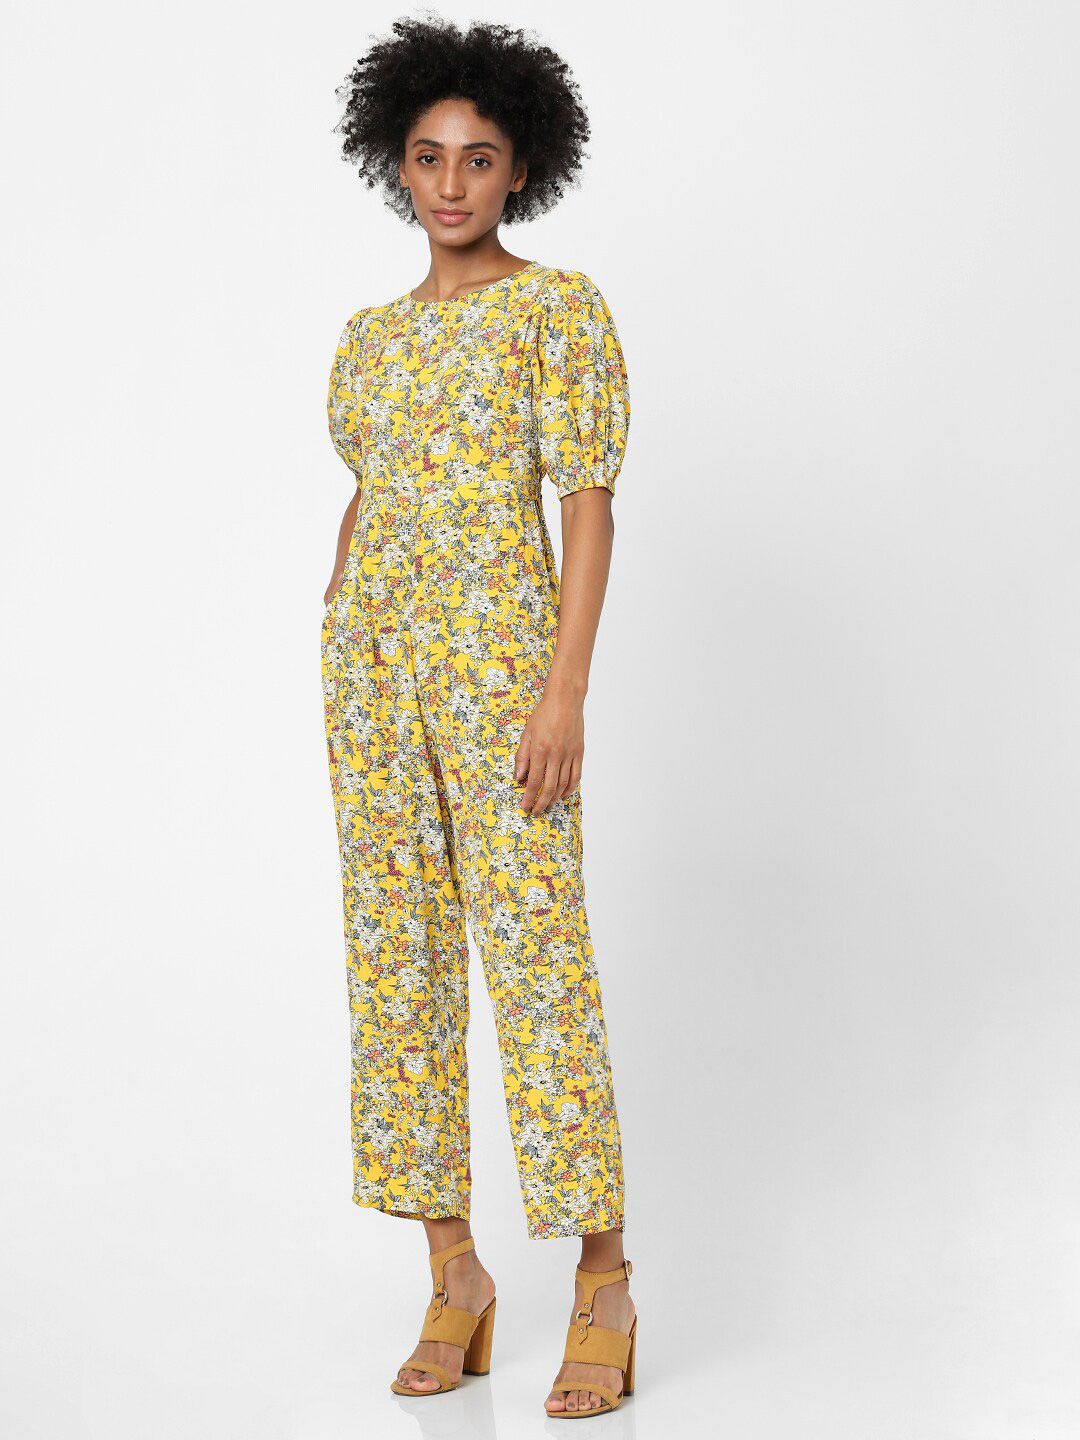 ONLY Women Yellow & White Printed Basic Jumpsuit Price in India